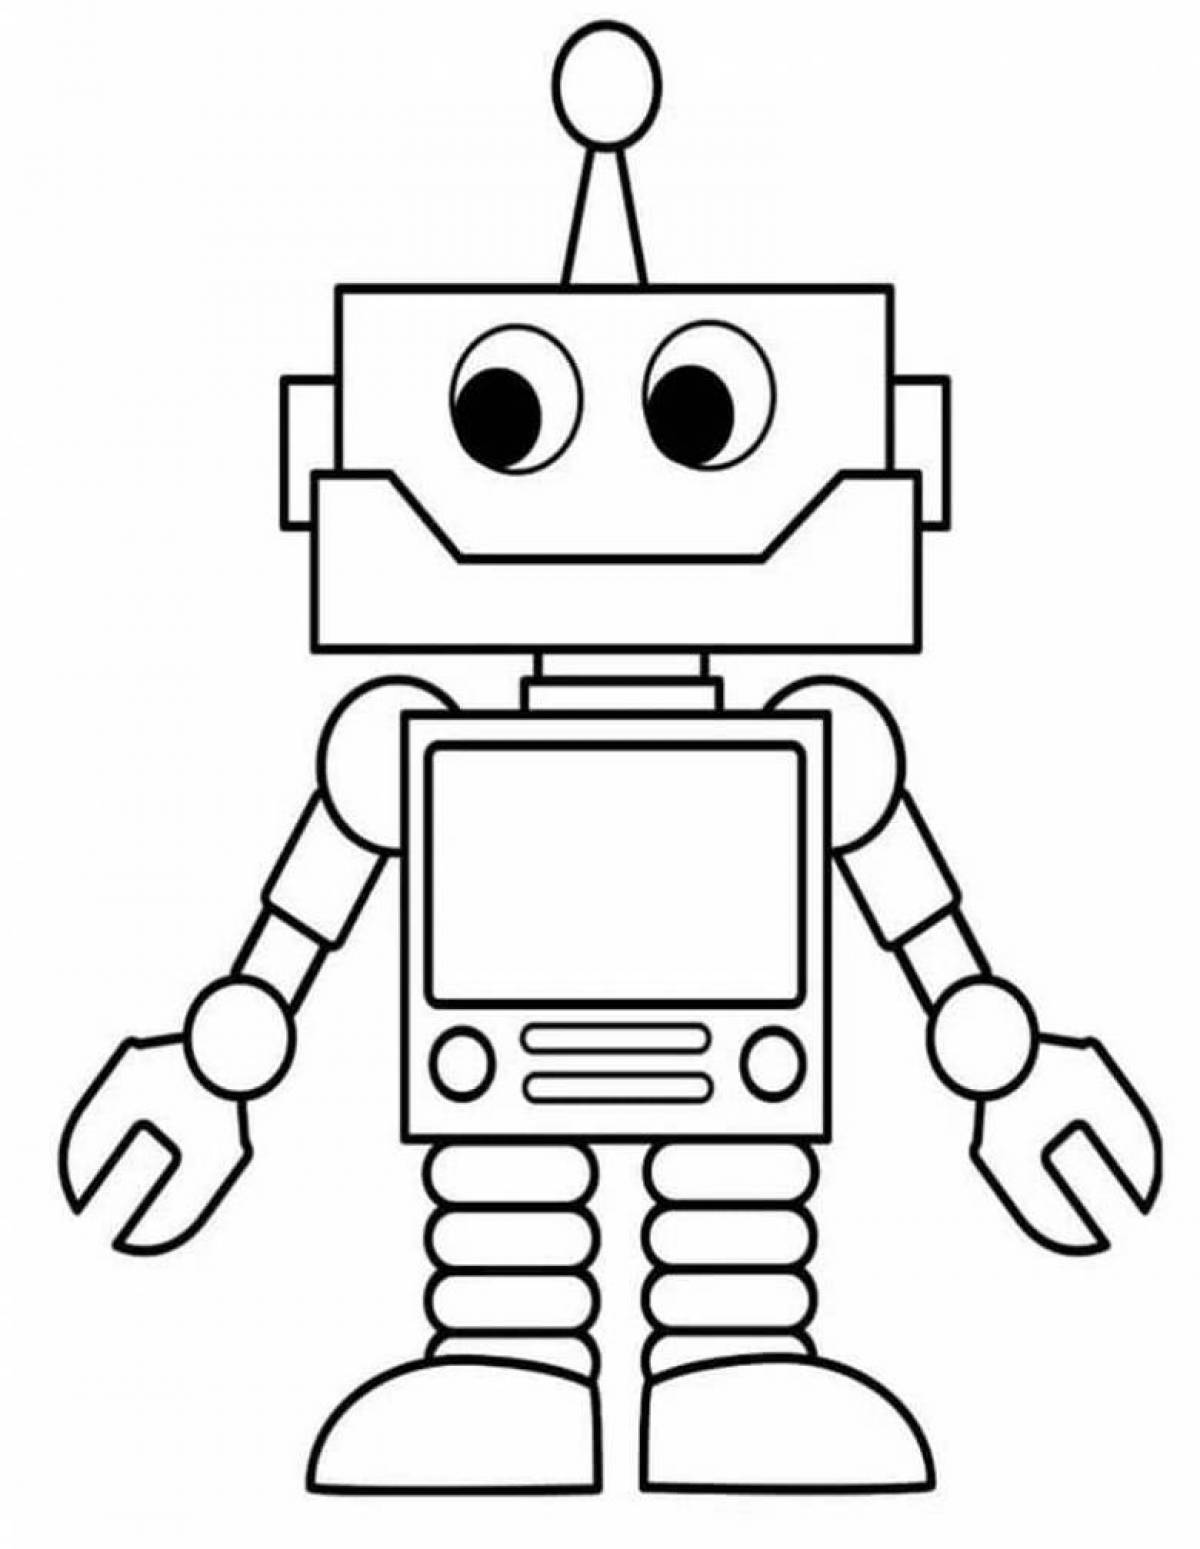 Outstanding robot coloring page for boys